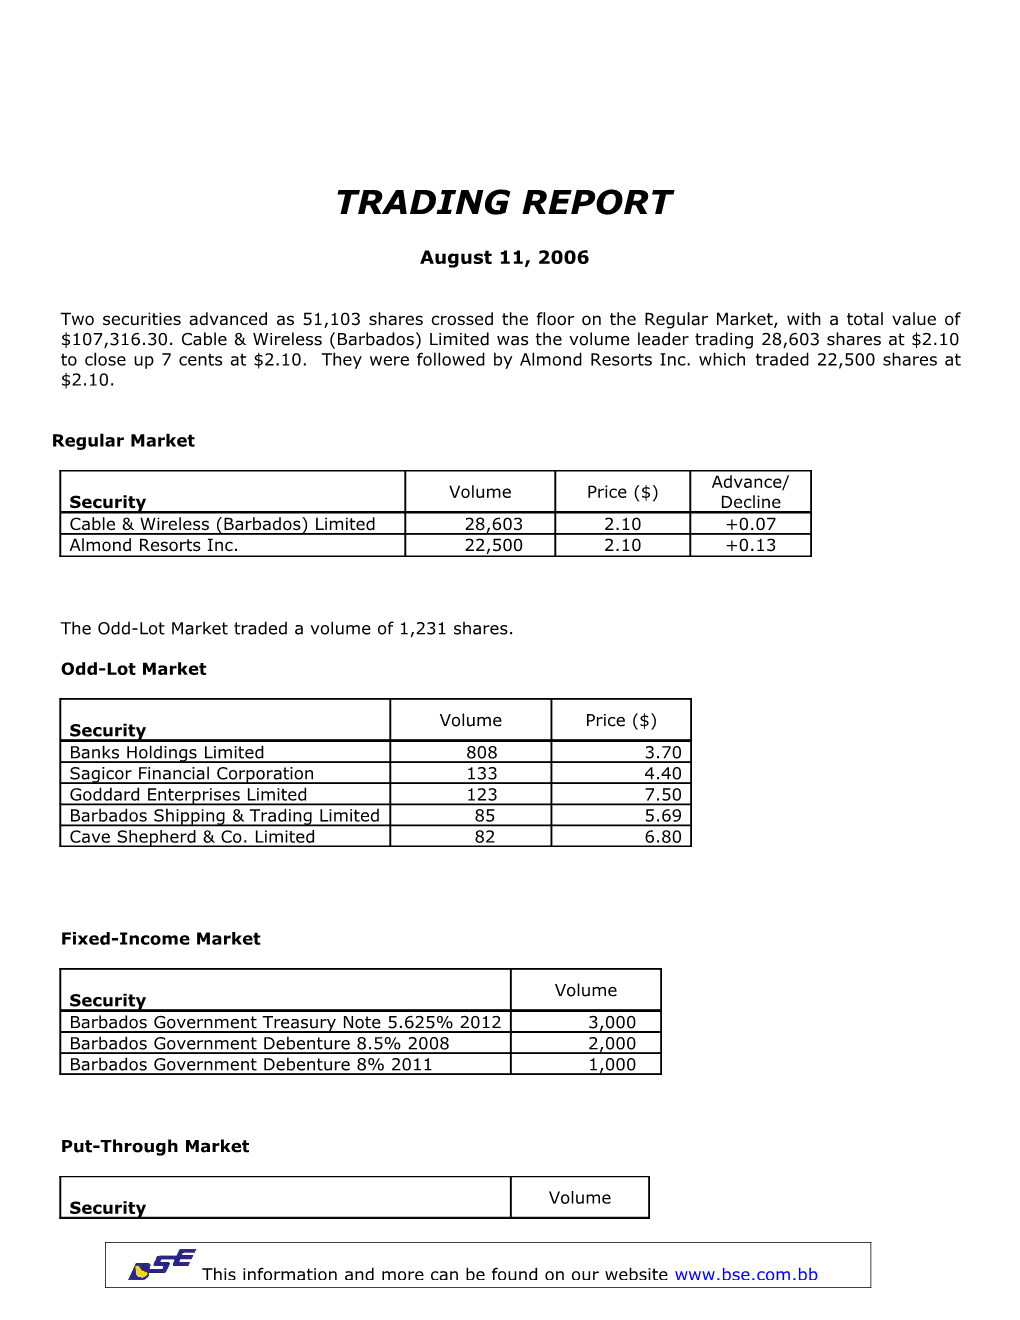 The Odd-Lot Market Traded a Volume of 1,231 Shares